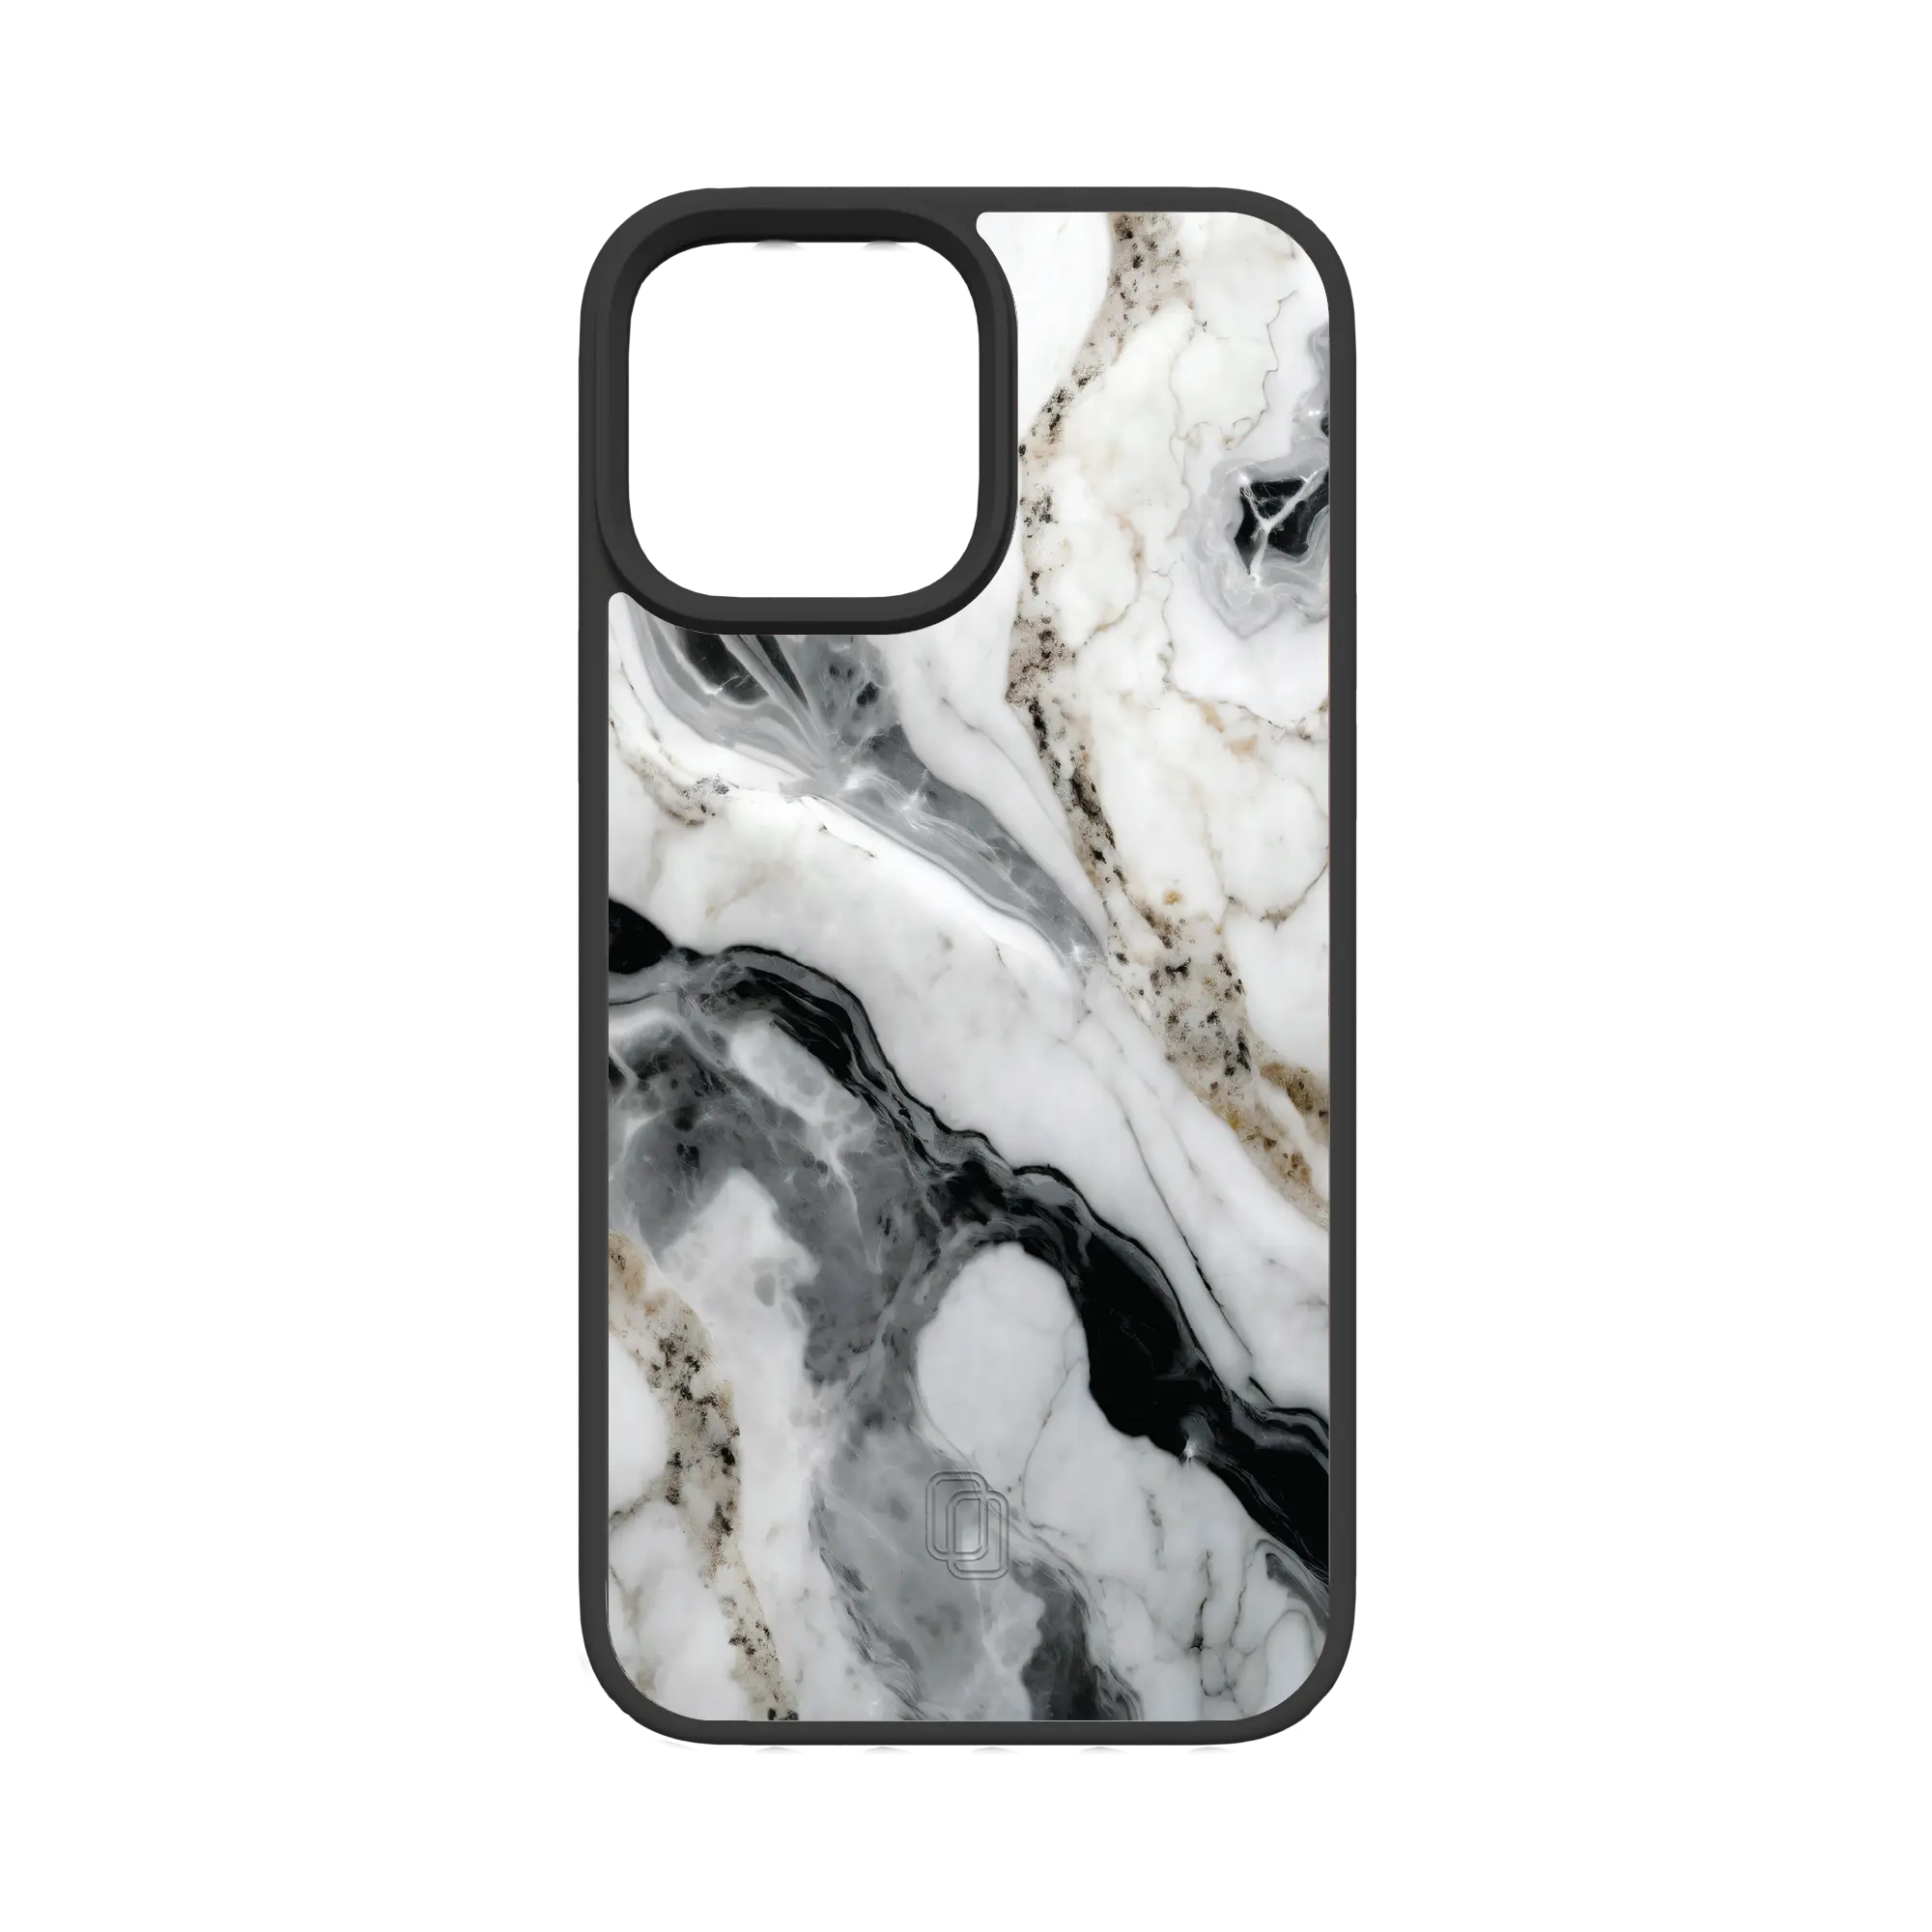 Apple-iPhone-12-Pro-Max-Crystal-Clear Pure Snow | Protective MagSafe Case | Marble Stone Collection for Apple iPhone 12 Series cellhelmet cellhelmet